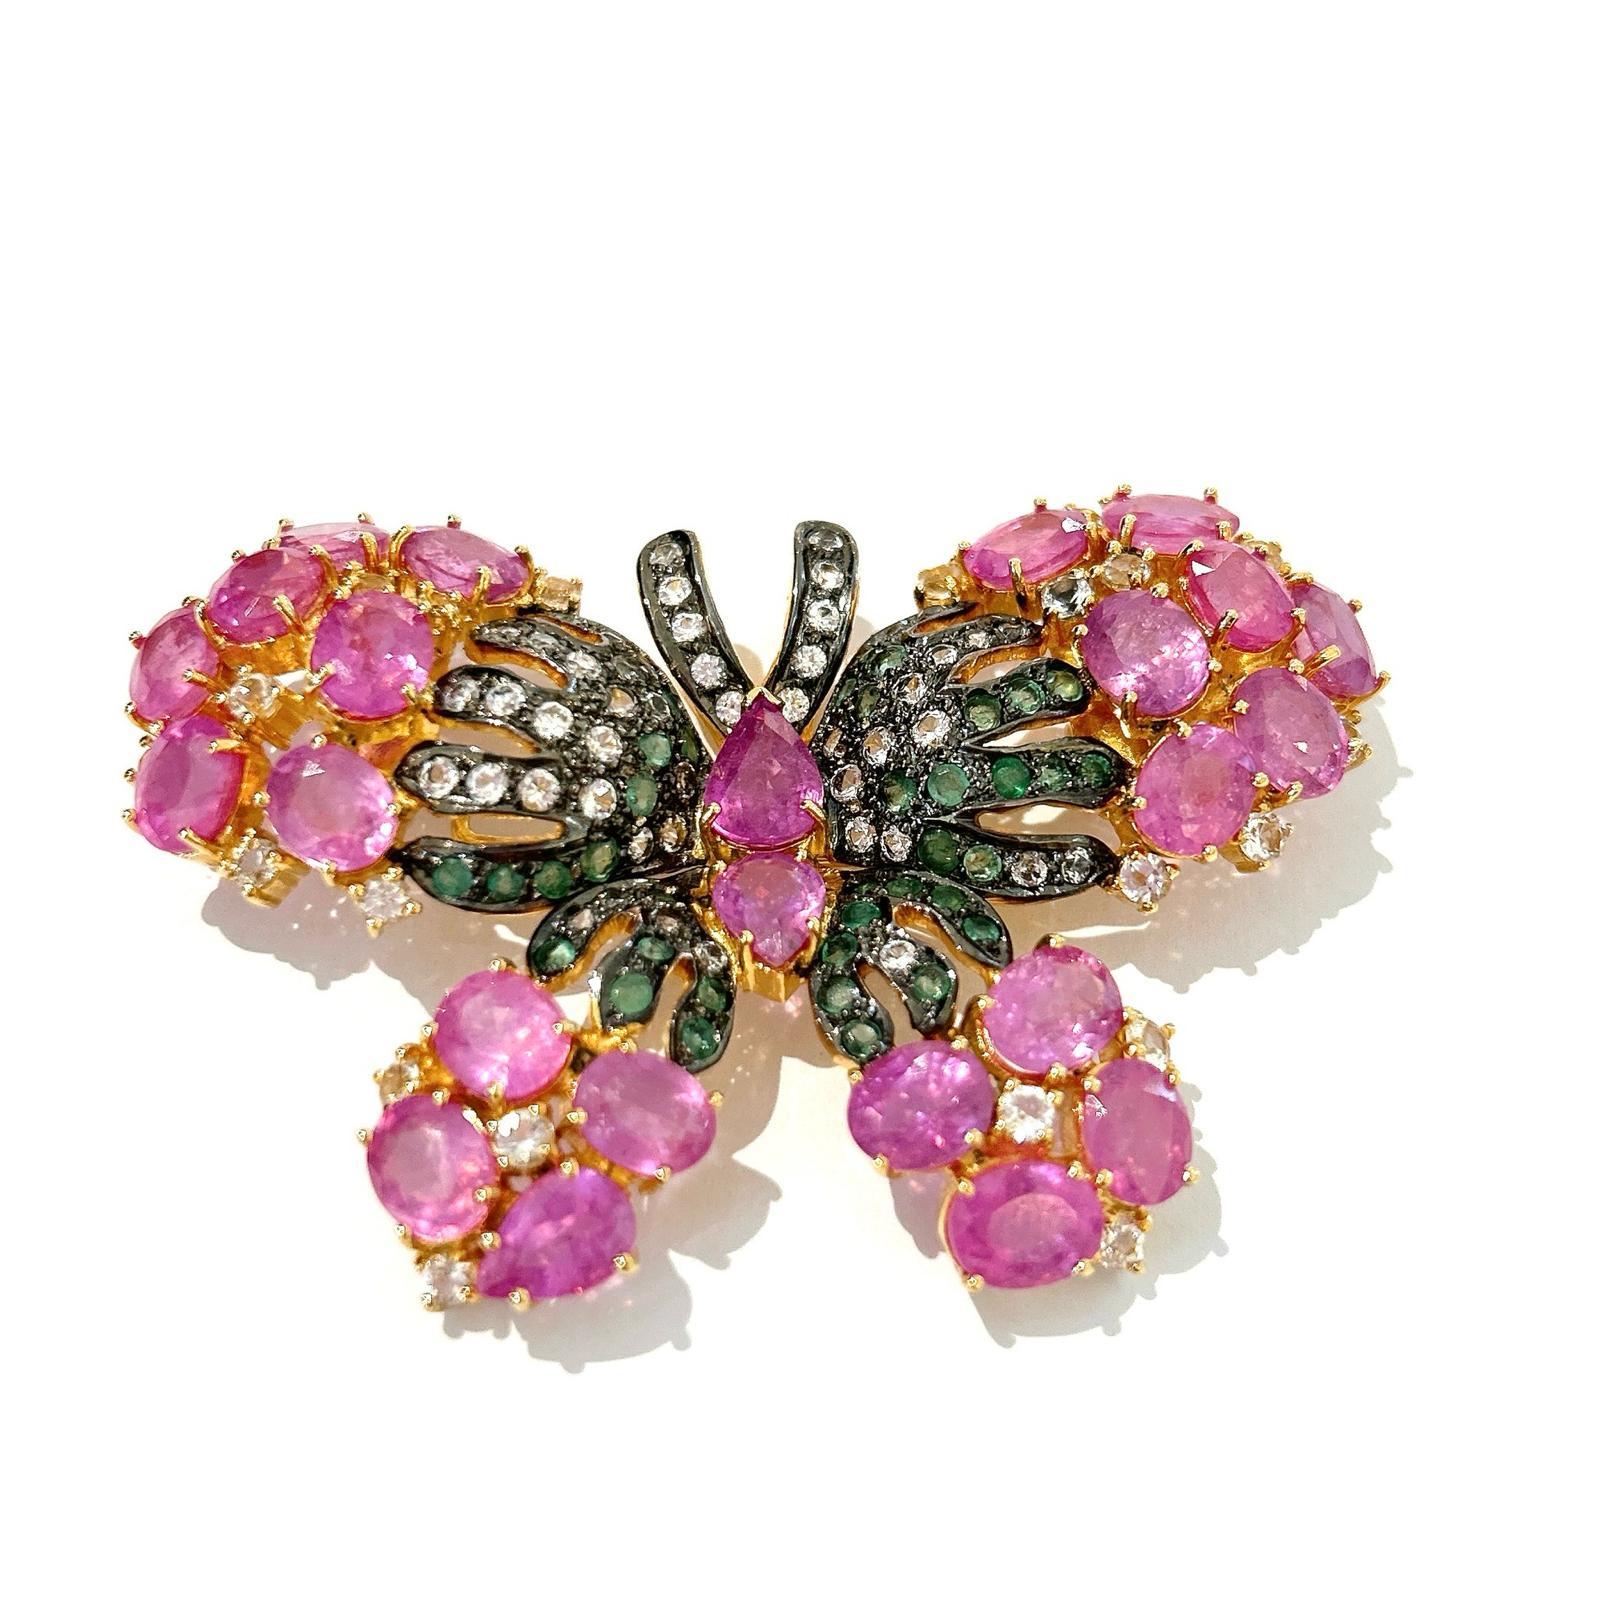 Bochic “Orient” Multi Sapphires & Ruby Brooch Set In 18K Gold & Silver 

Can be worn as a brooch and a pendant 

Natural light Fancy Pink/Red Ruby  - 30 carat 
Multi color Natural Sapphires from Sri Lanka 
1.00 carat
Natural Emeralds  - 2.50 carats